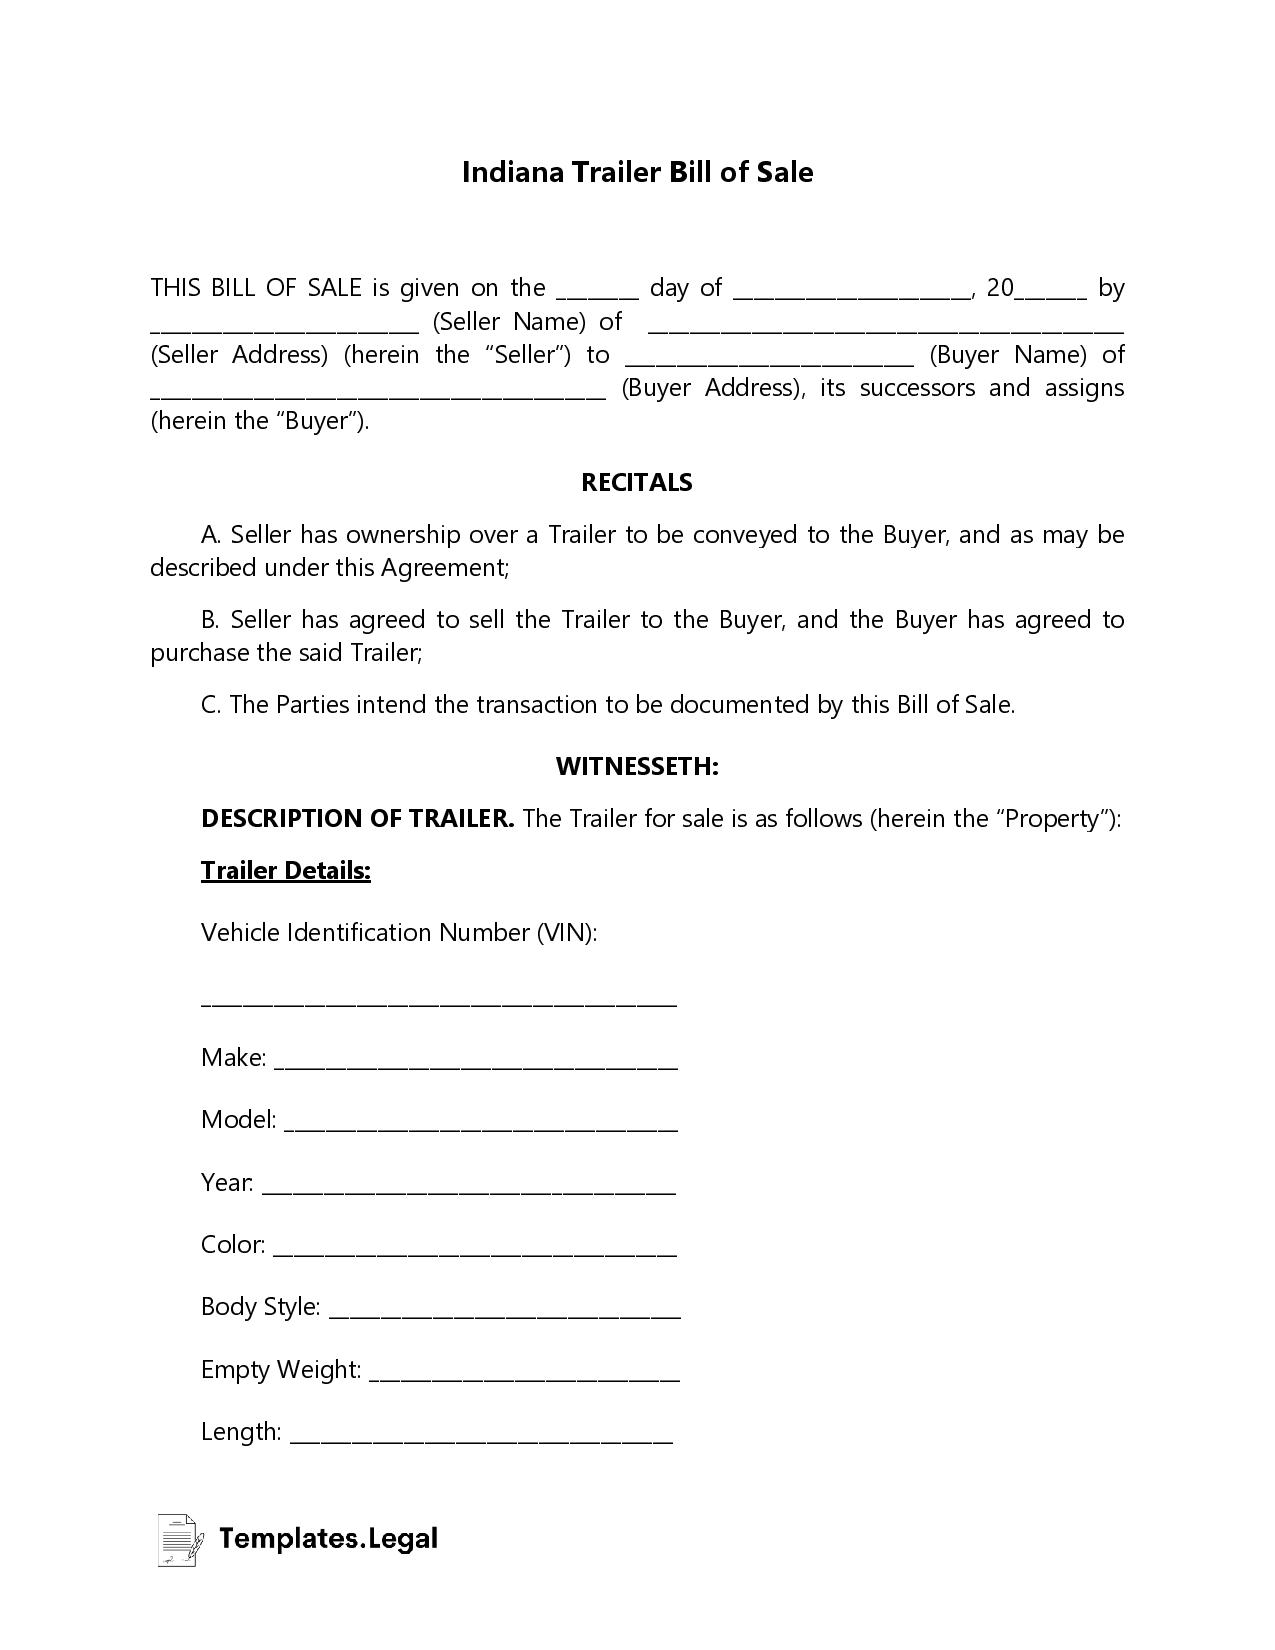 Indiana Trailer Bill of Sale - Templates.Legal